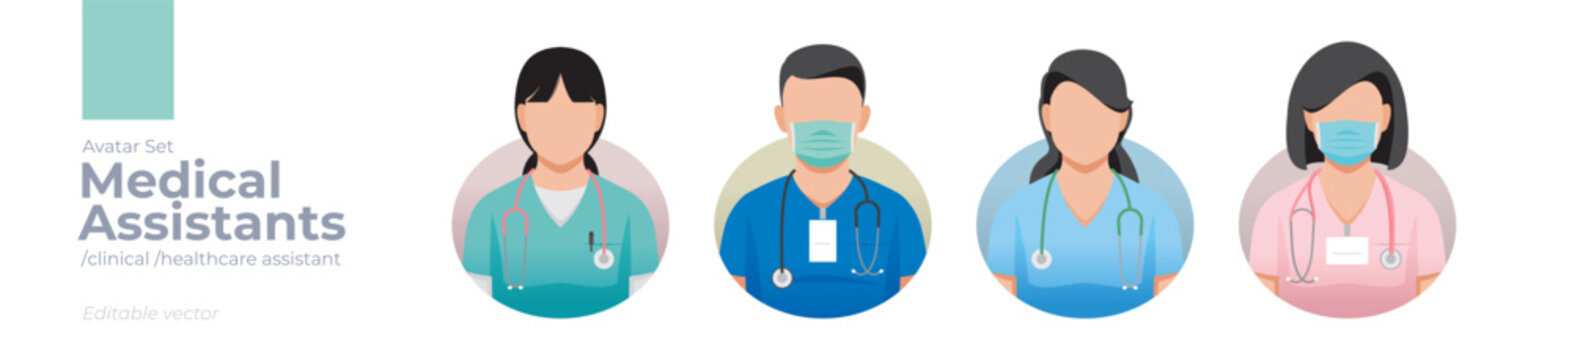 Medical assistant picture avatar icons. Illustration of men and women wearing scrubs outfit